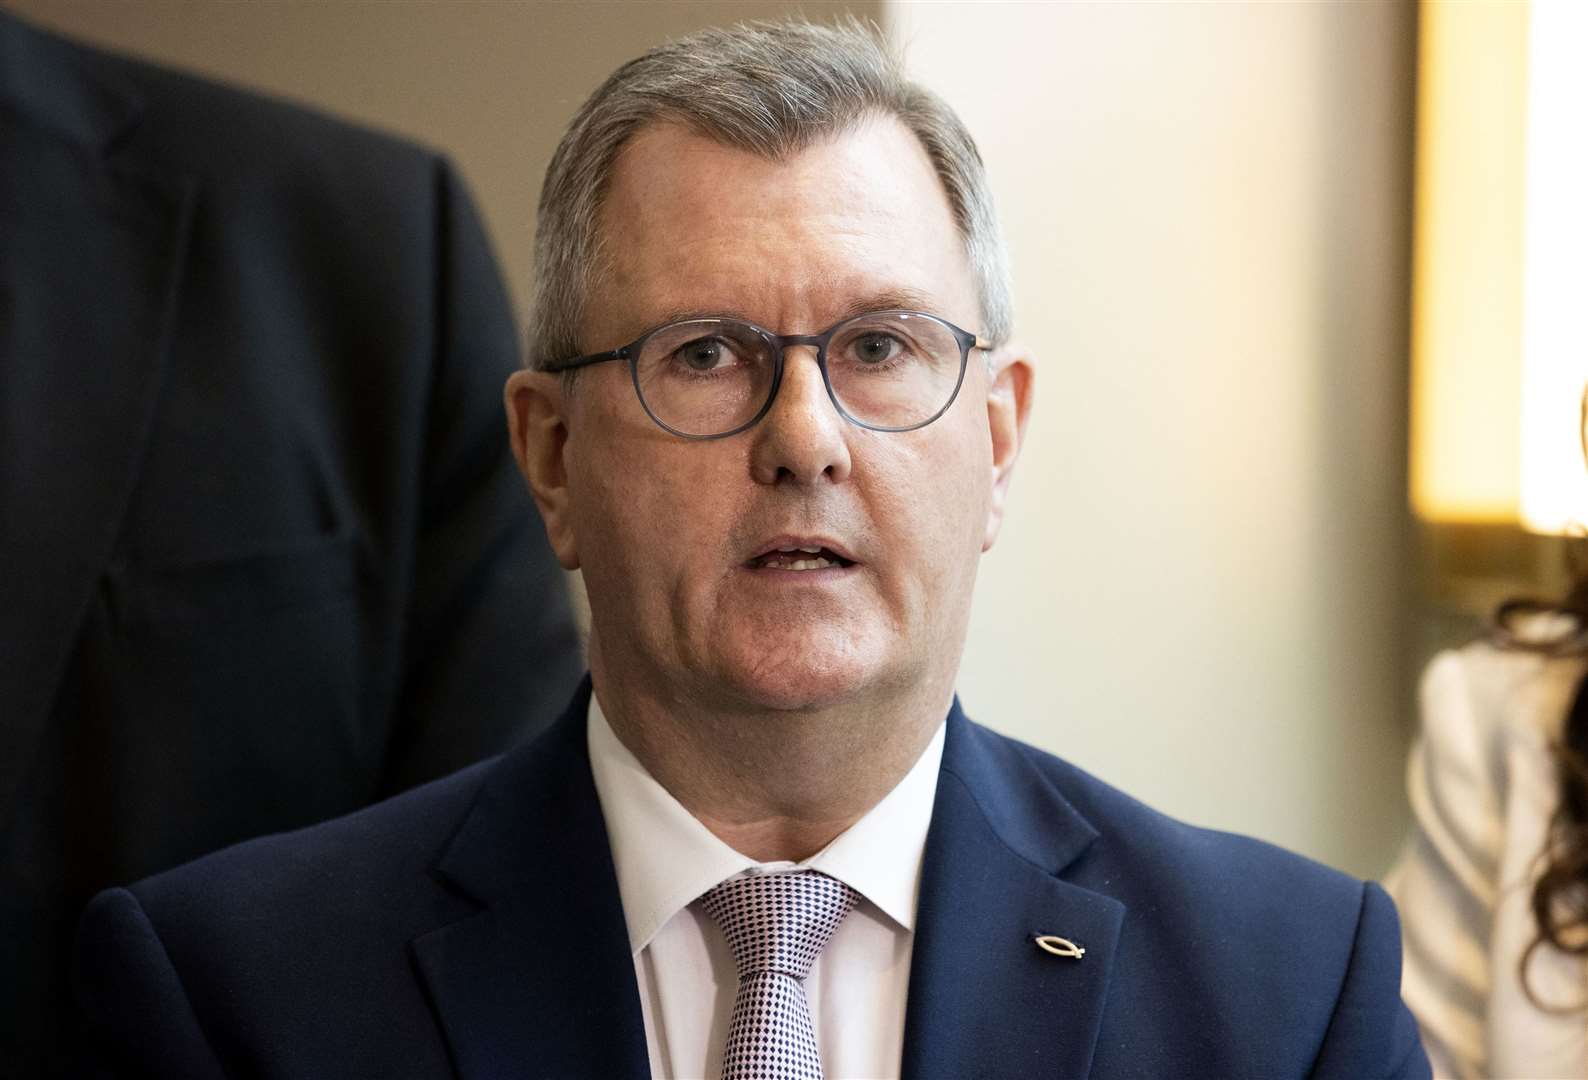 DUP leader Sir Jeffrey Donaldson has insisted his party will not return to powersharing until major changes are secured to the NI Protocol (Liam McBurney/PA)